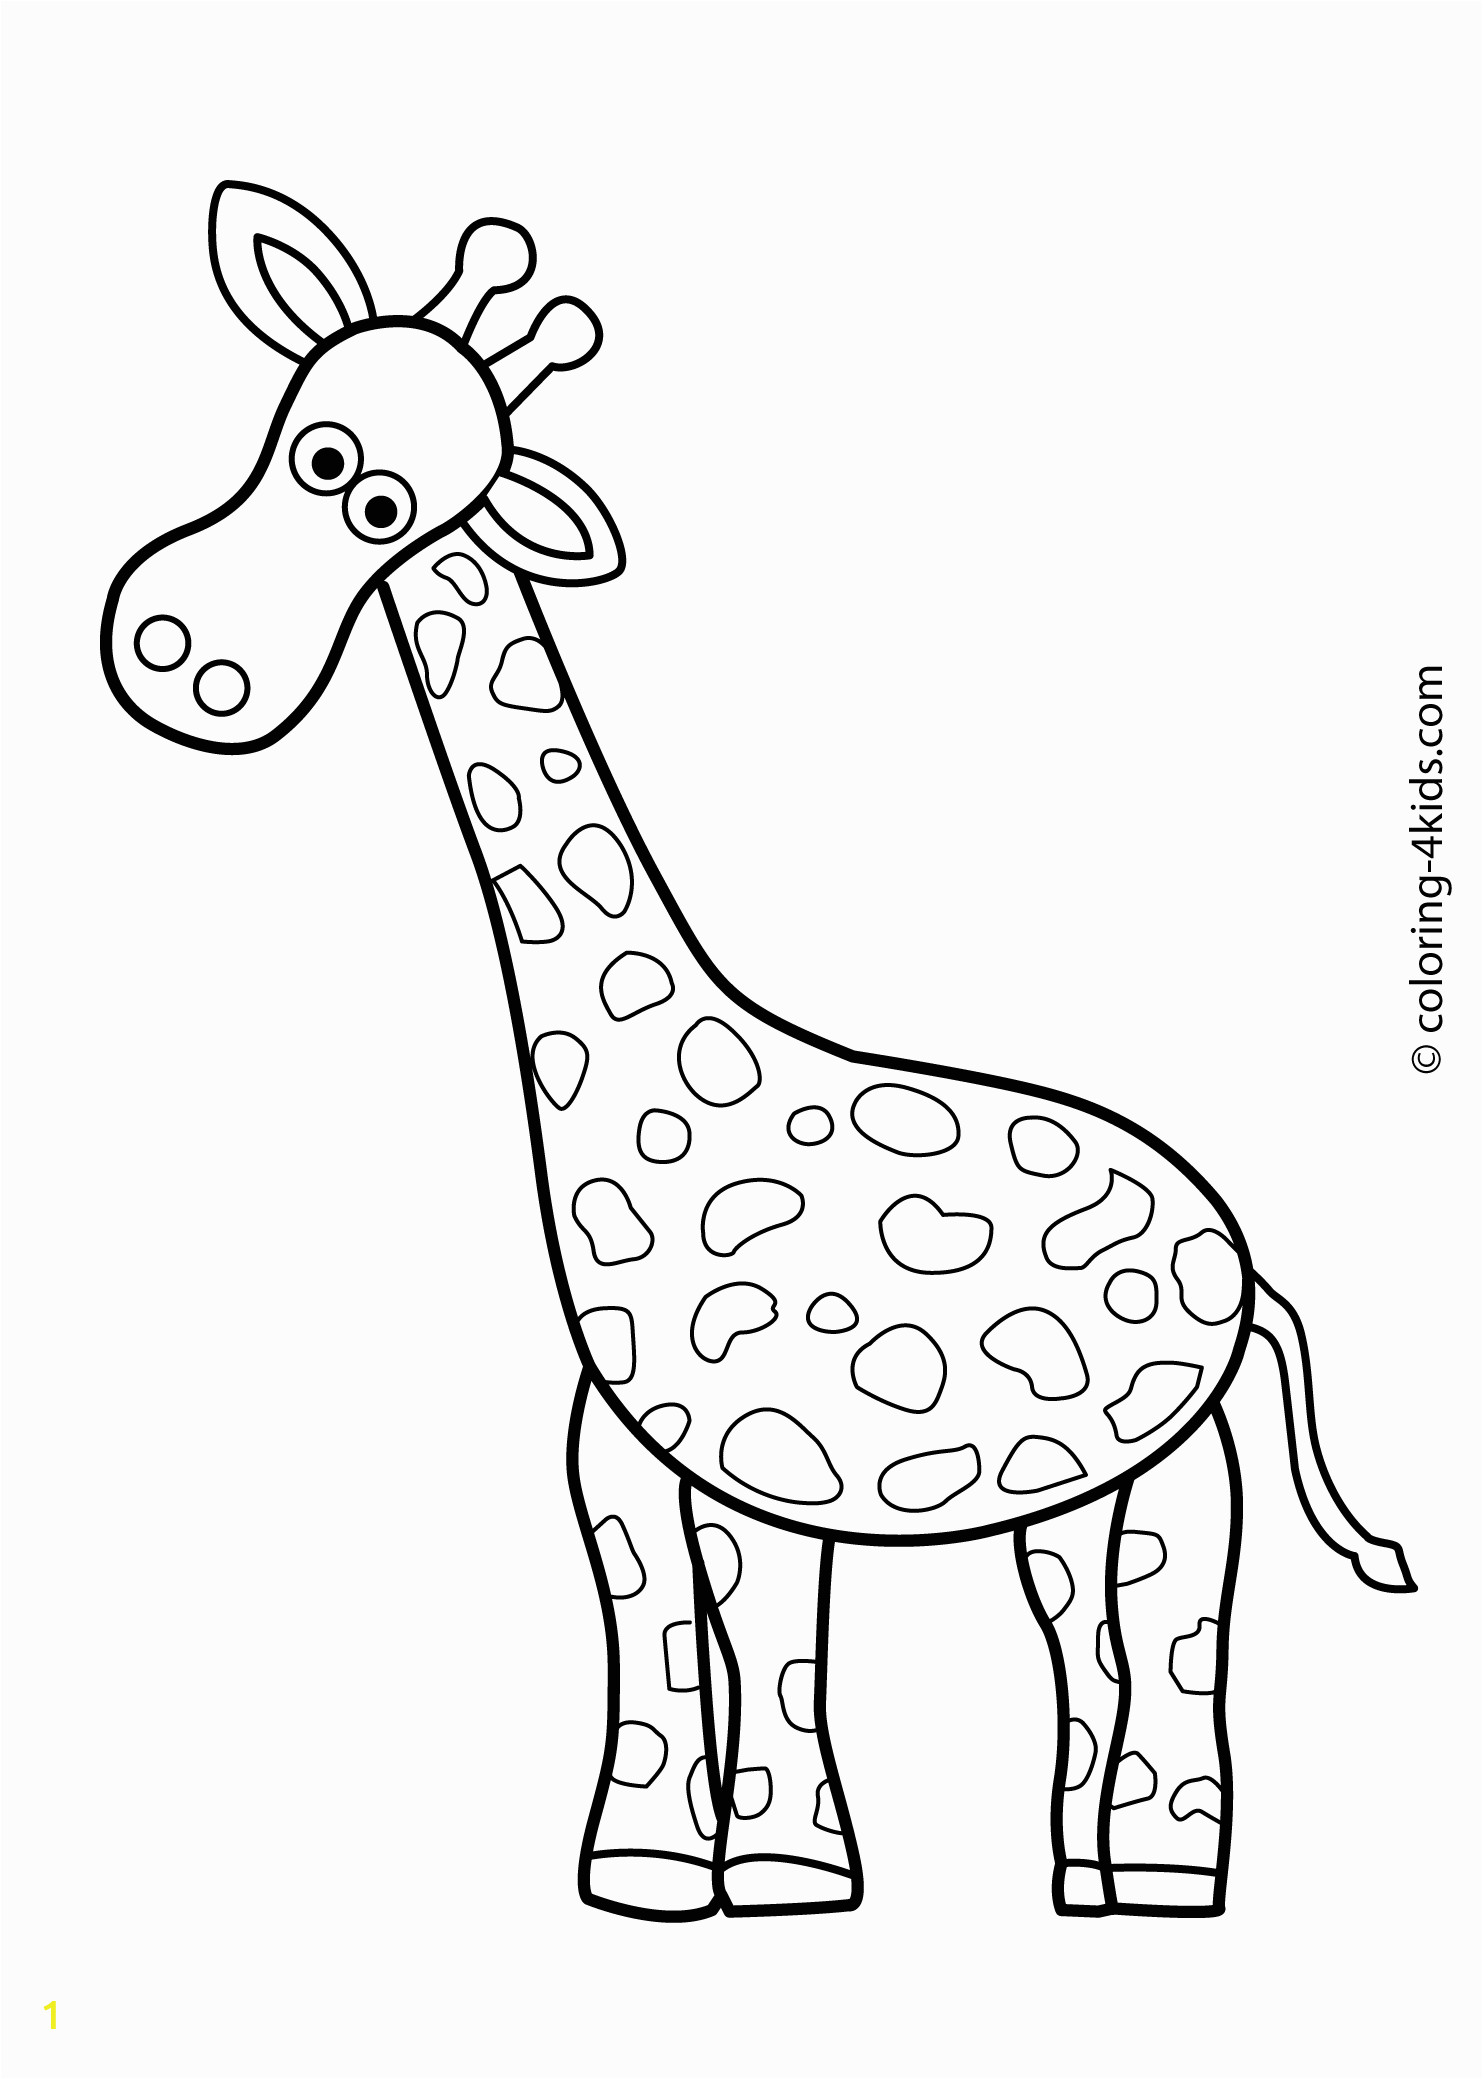 Printable Colouring Pages Animals